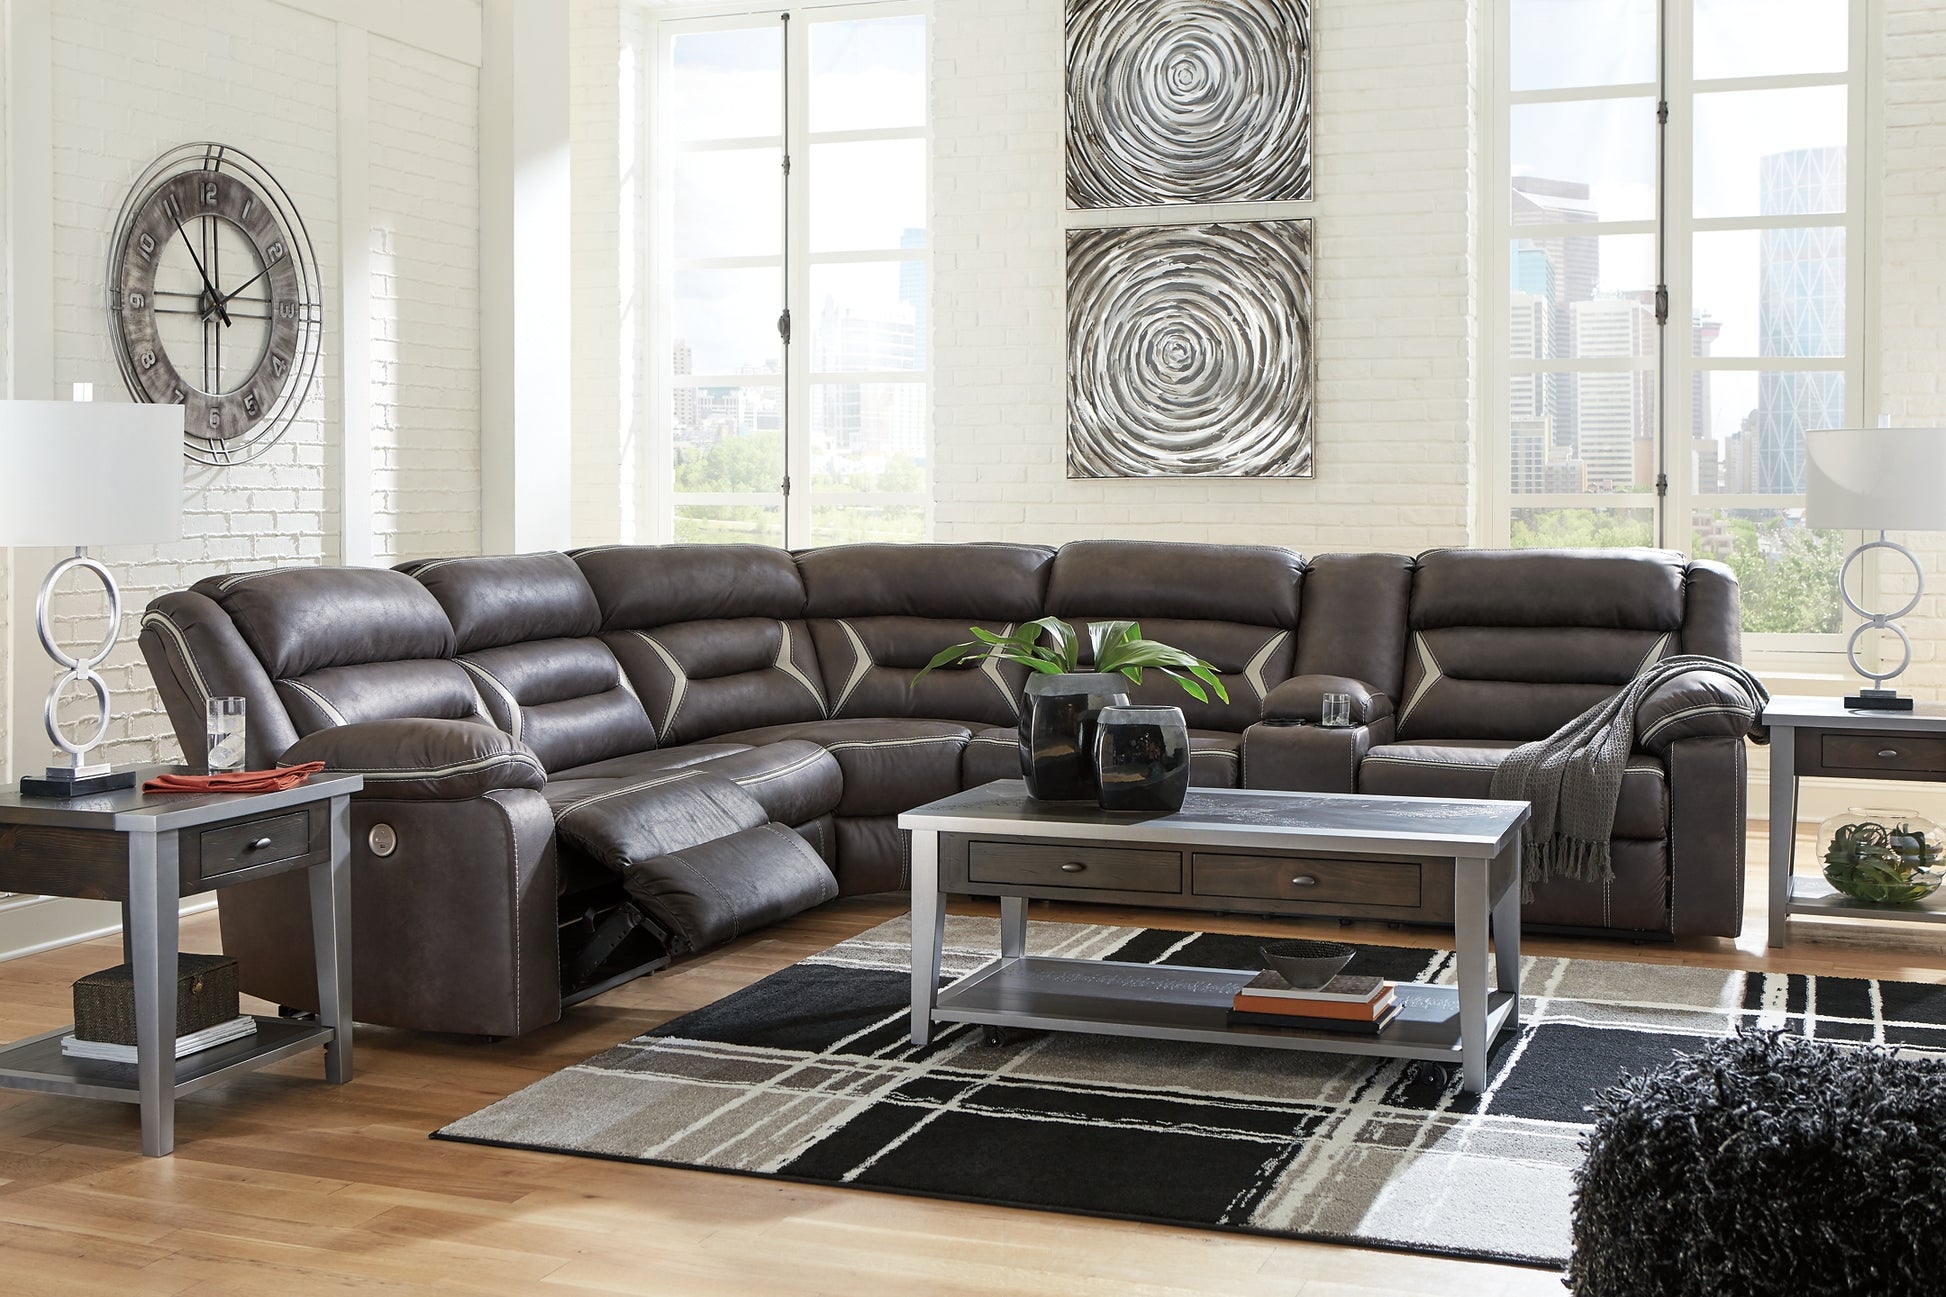 Kincord 4-Piece Sectional with Recliner Wilson Furniture (OH)  in Bridgeport, Ohio. Serving Bridgeport, Yorkville, Bellaire, & Avondale